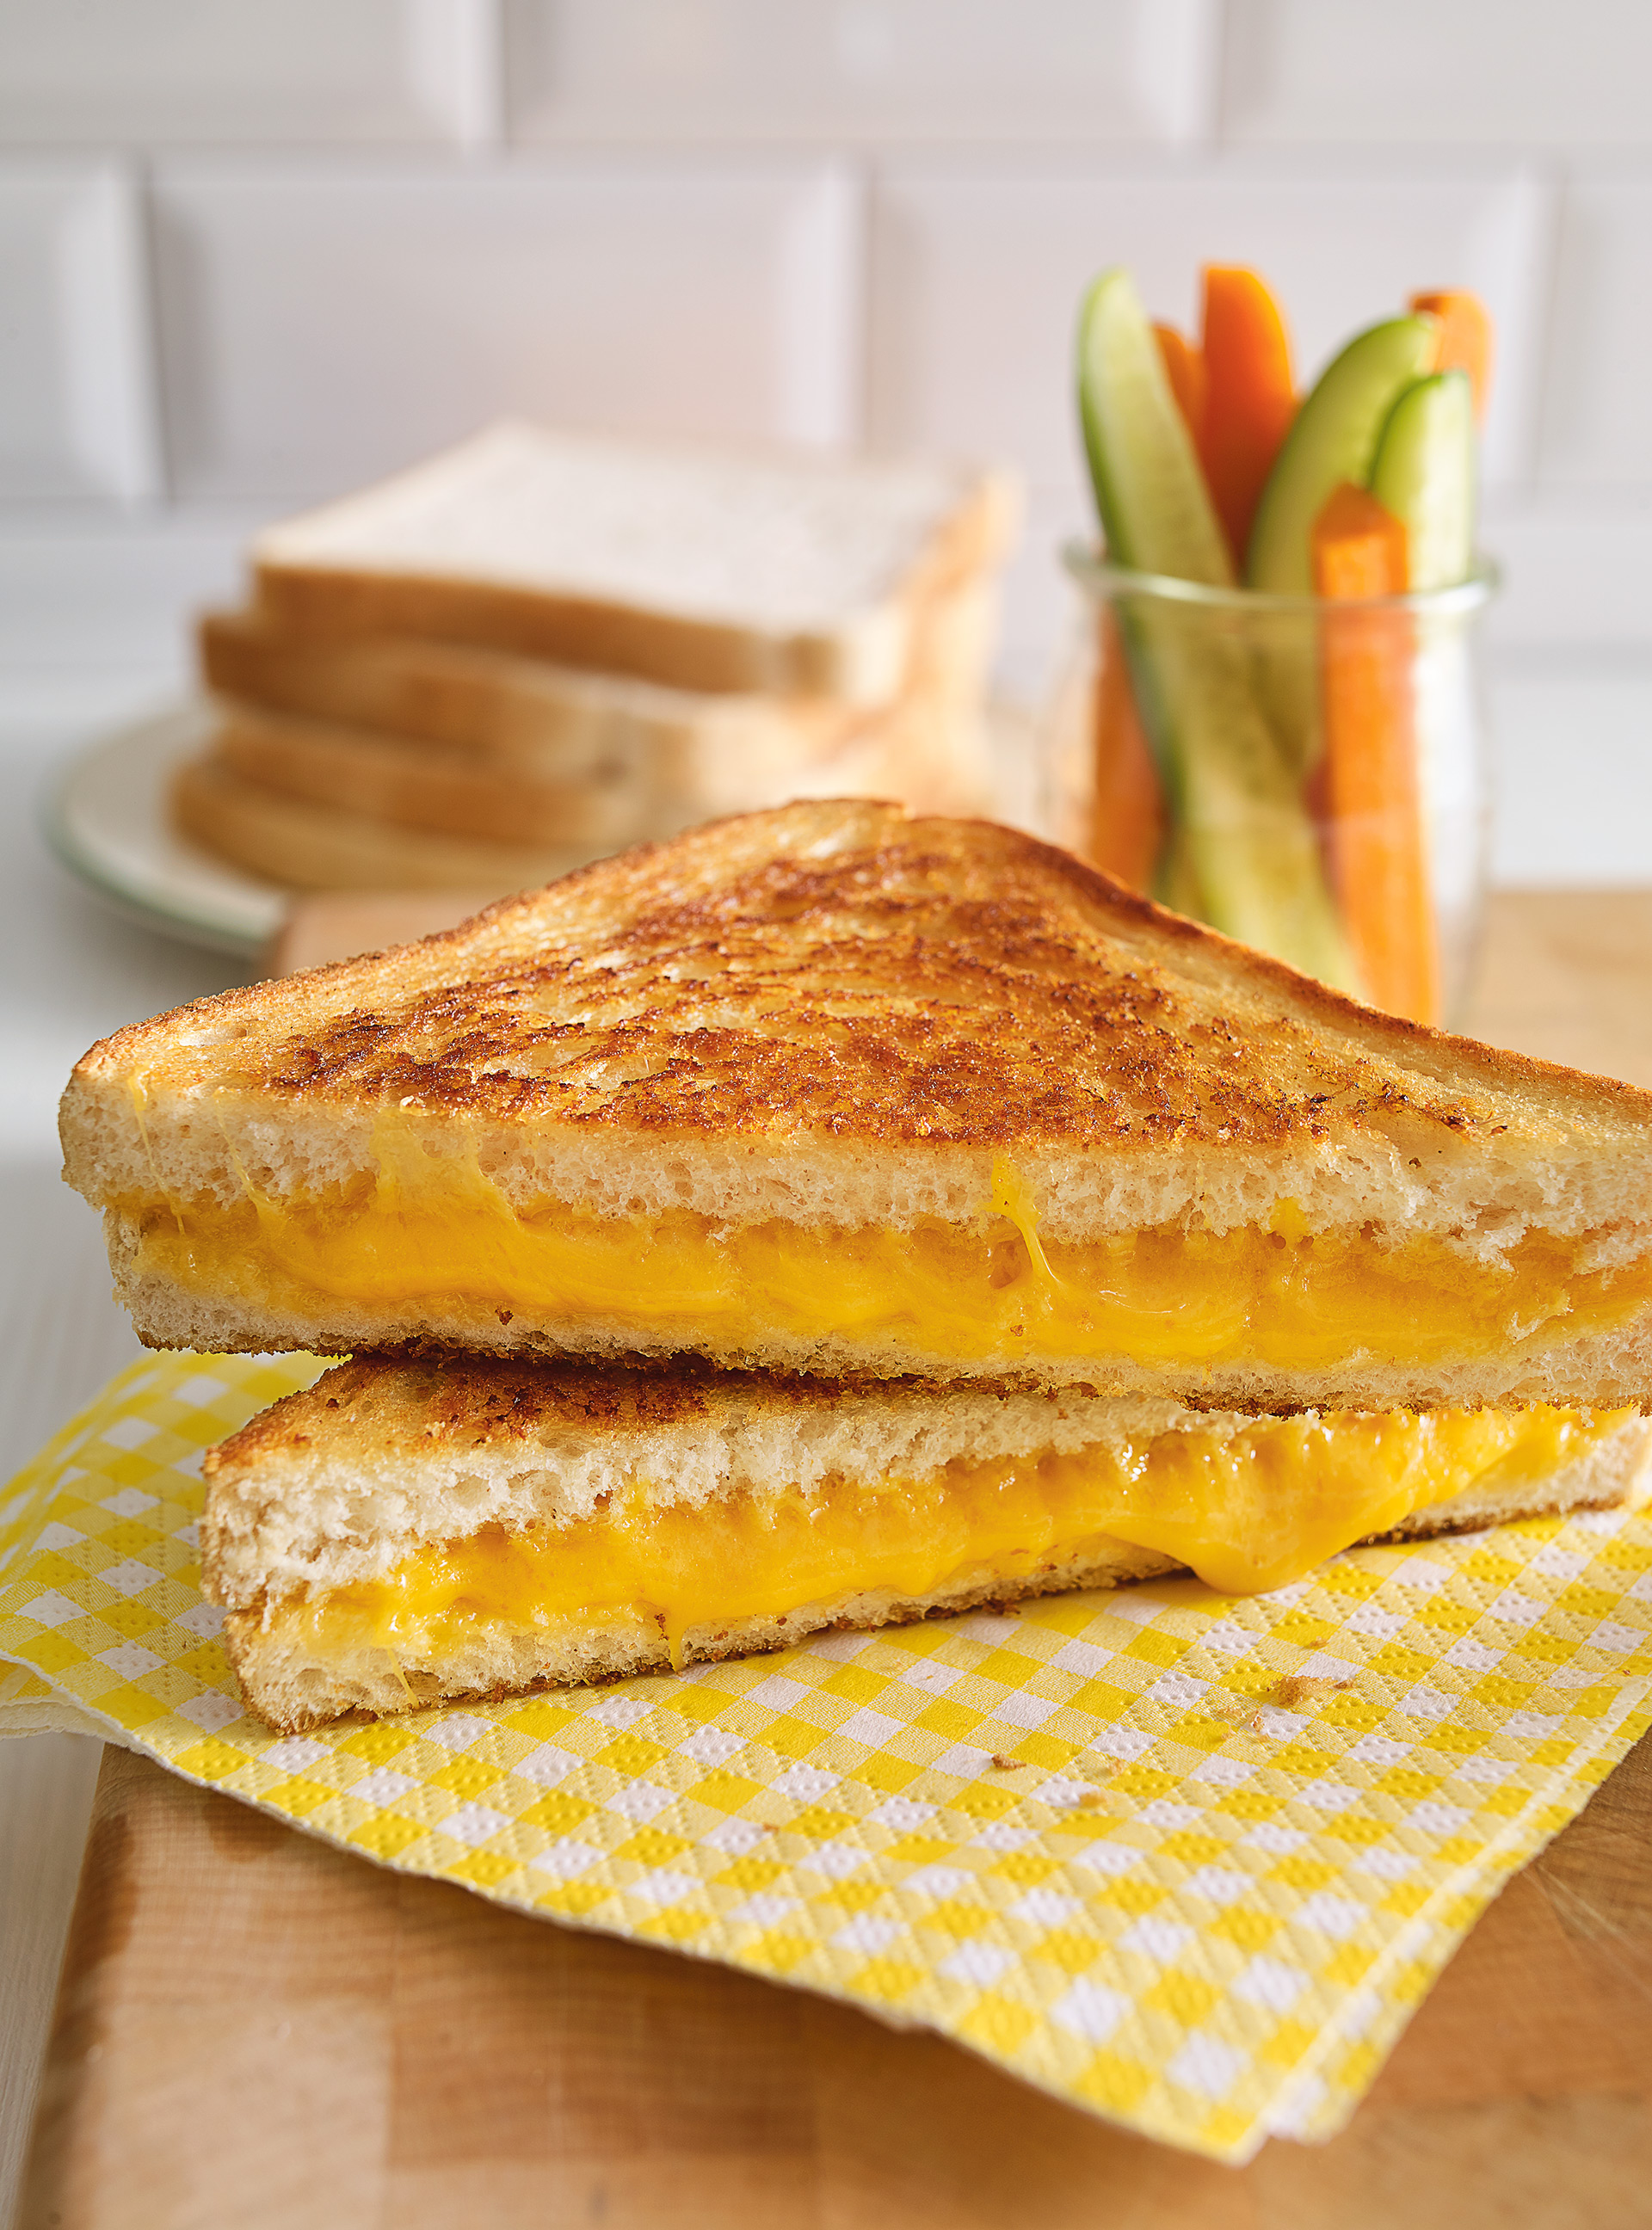 Grilled cheese classique